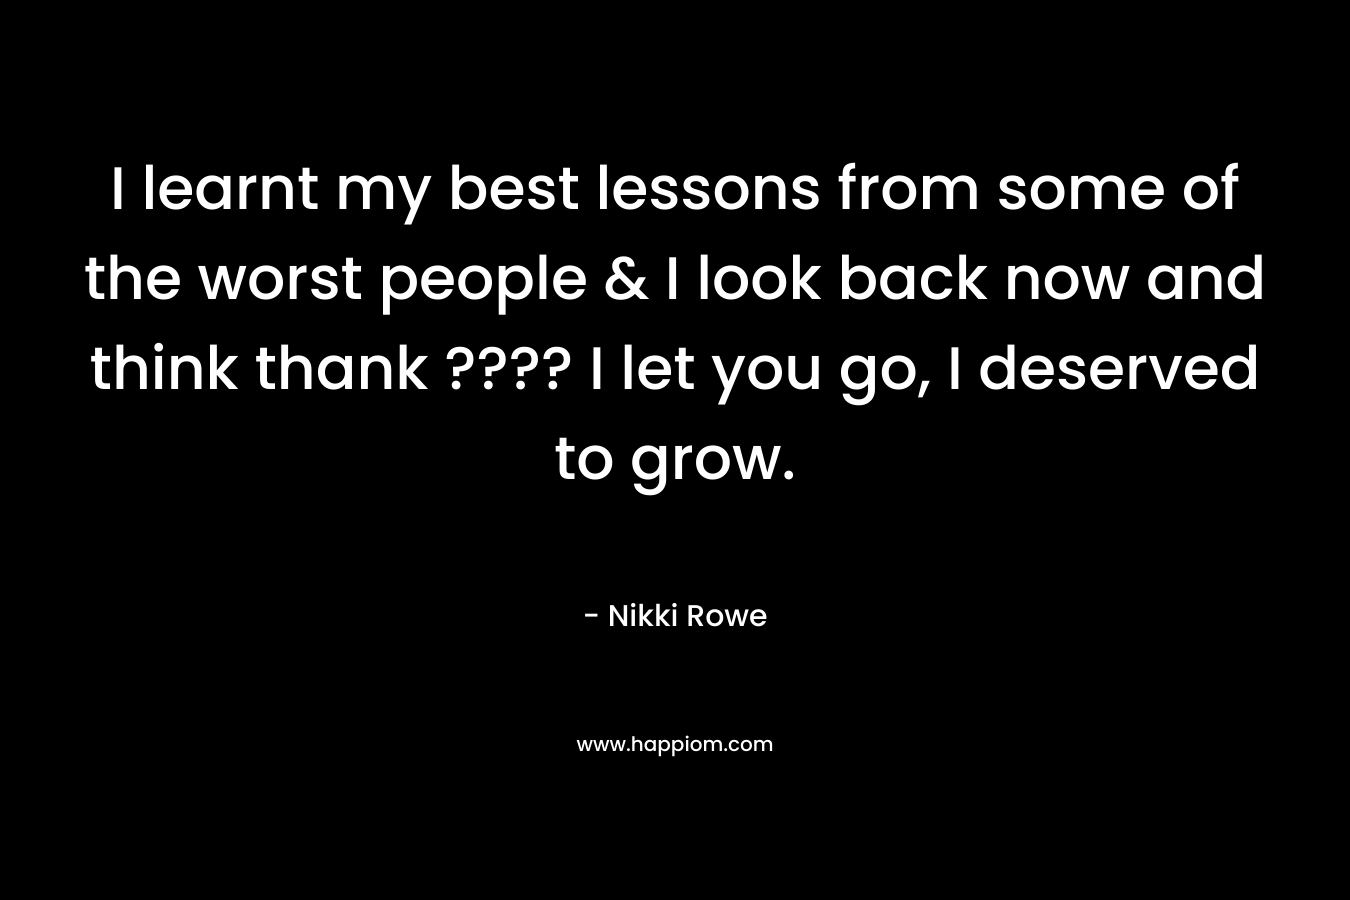 I learnt my best lessons from some of the worst people & I look back now and think thank ???? I let you go, I deserved to grow.